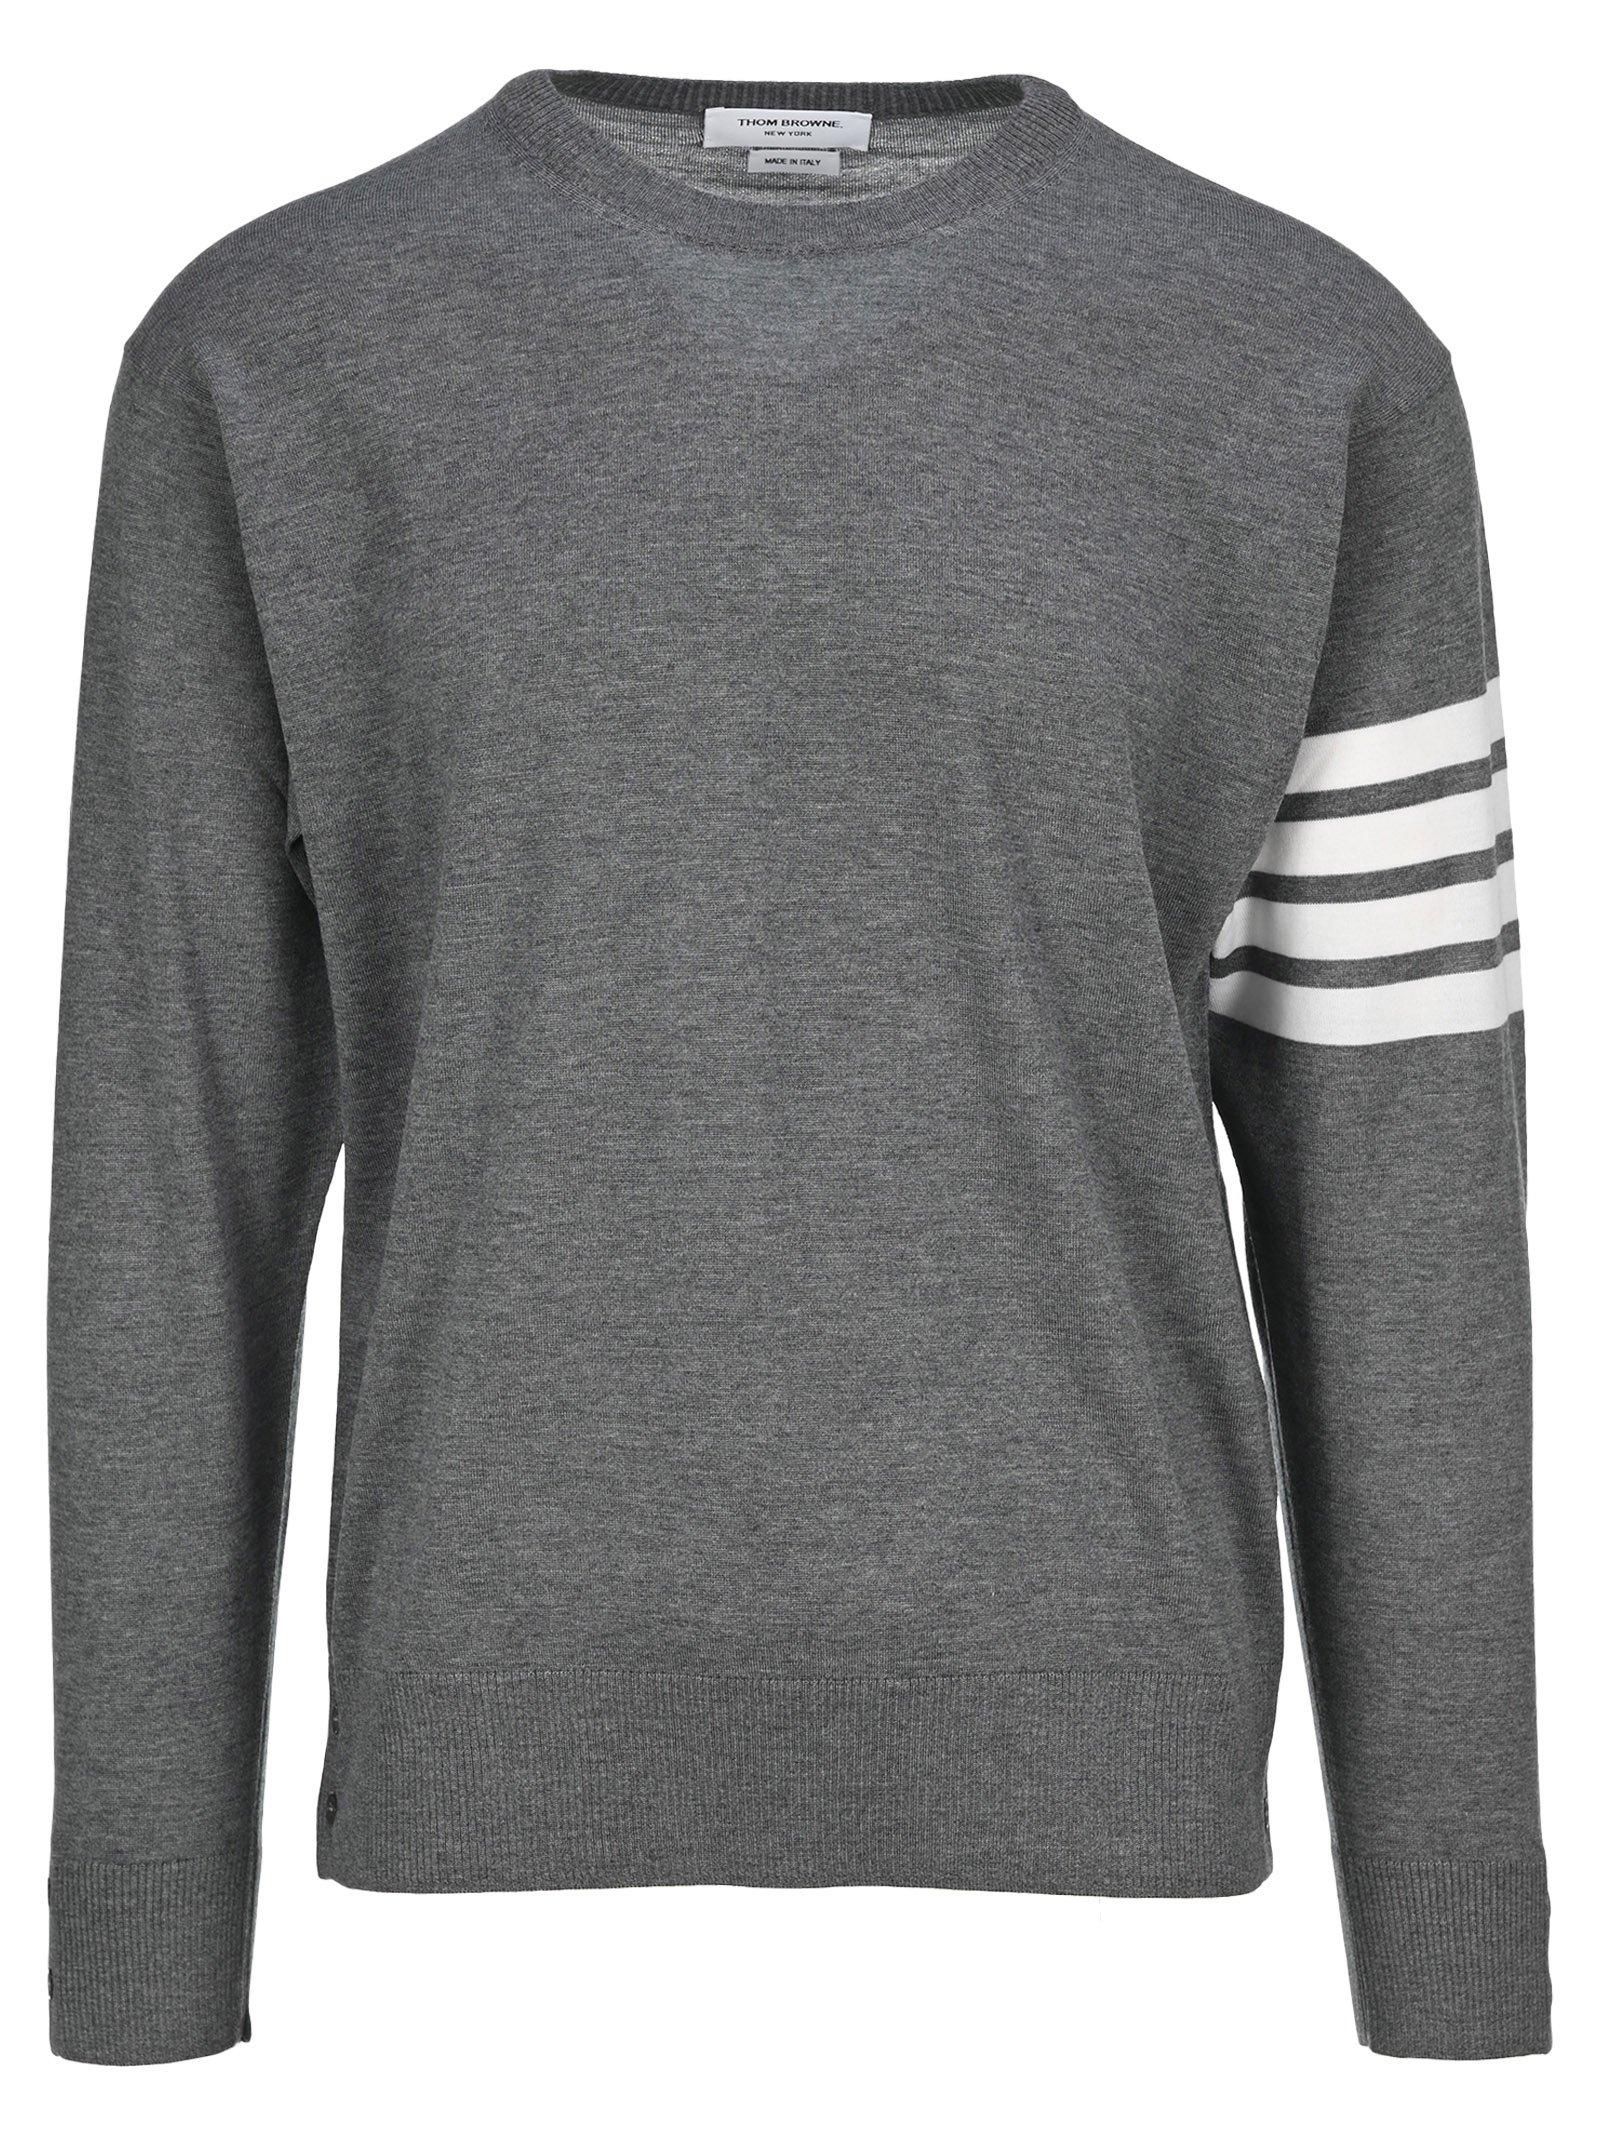 Thom Browne Wool 4 Bar Sweater in Grey (Gray) for Men - Lyst